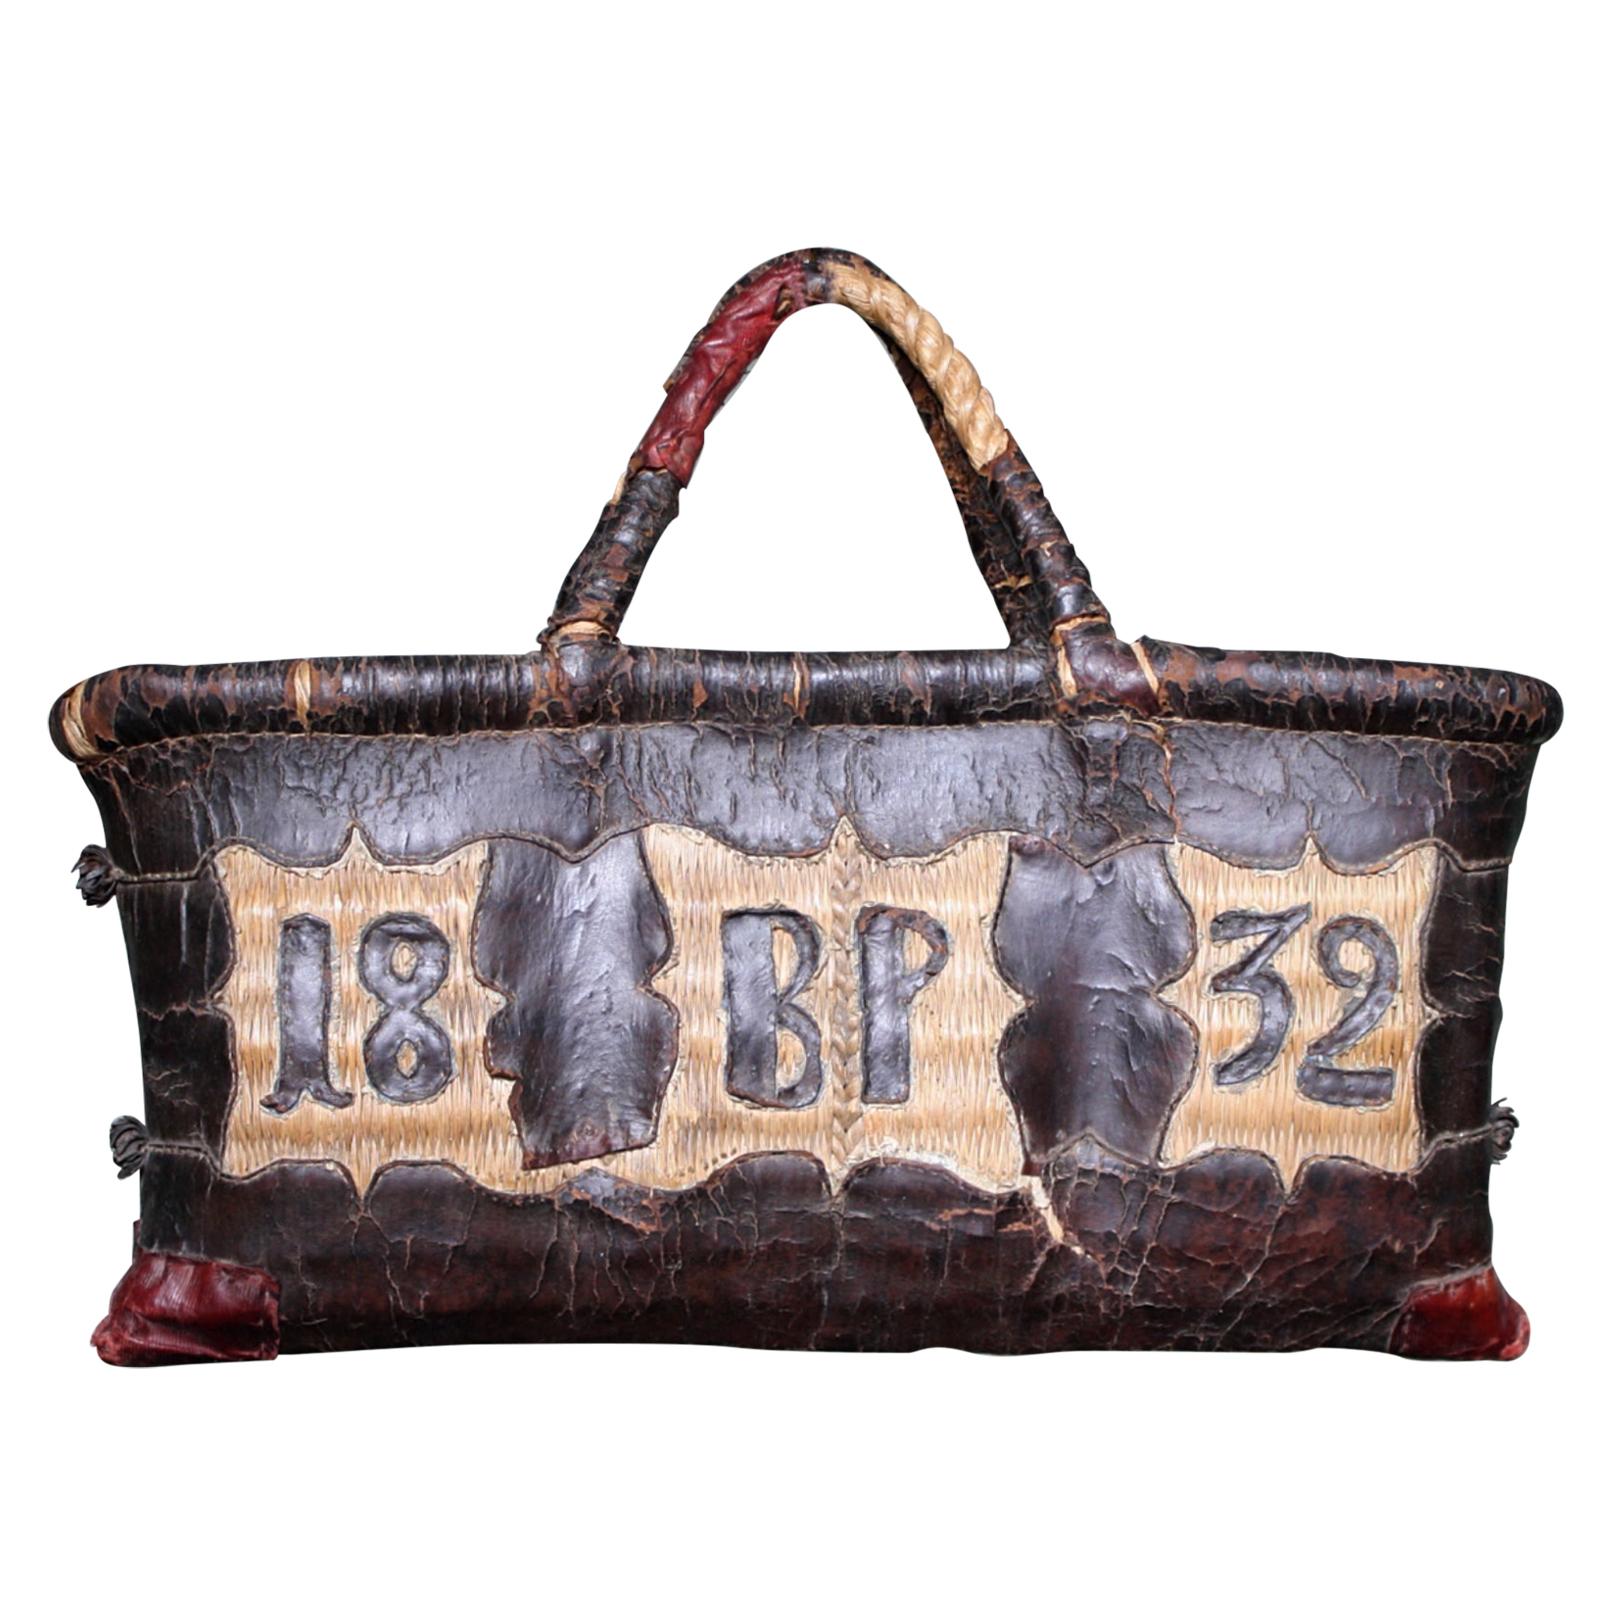 Folk Art Leather and Woven Rush Butchers Bag Initials BP Dated 1832